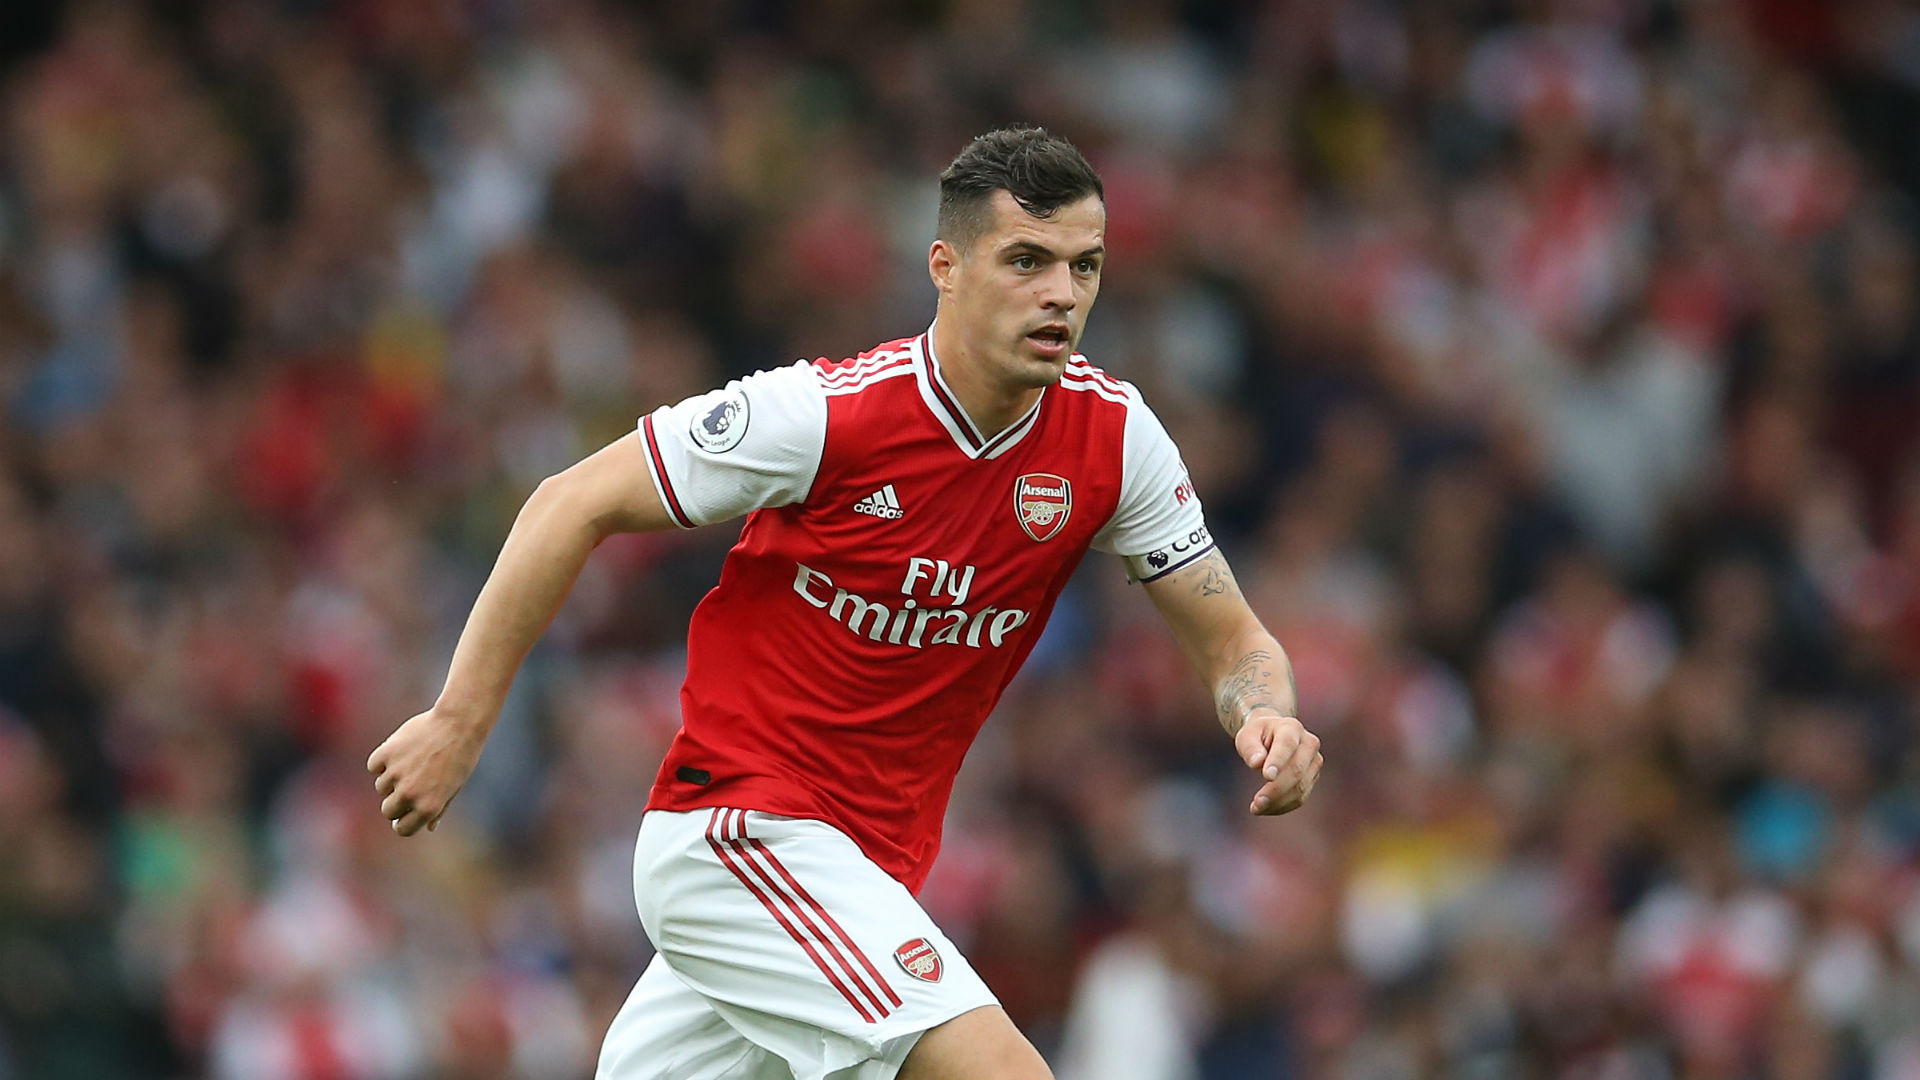 Granit Xhaka was booed by Arsenal supporters in Sunday's win over Aston Villa, much to the frustration of his boss Unai Emery.